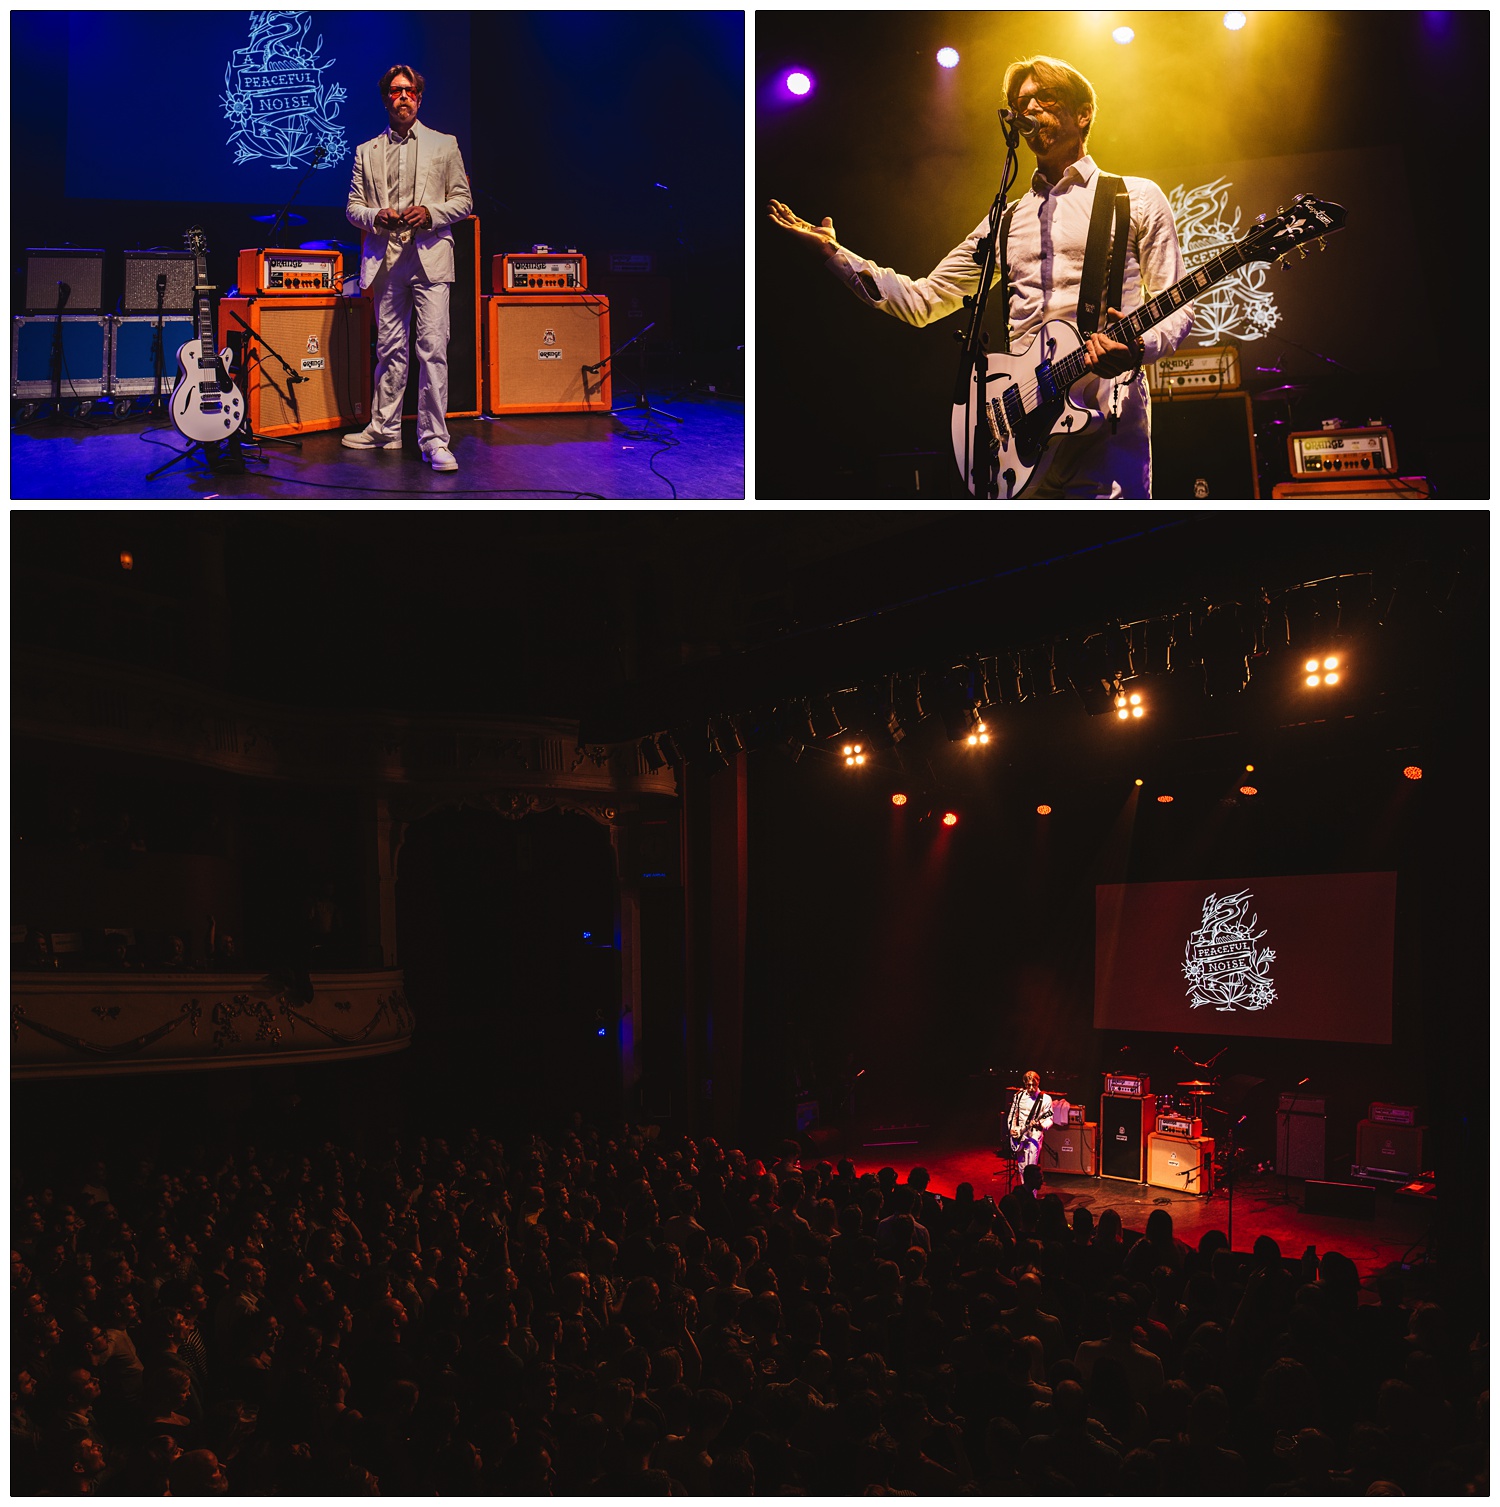 Jesse Hughes of Eagles of Death Metal on stage at A Peaceful Noise concert for Nick Alexander